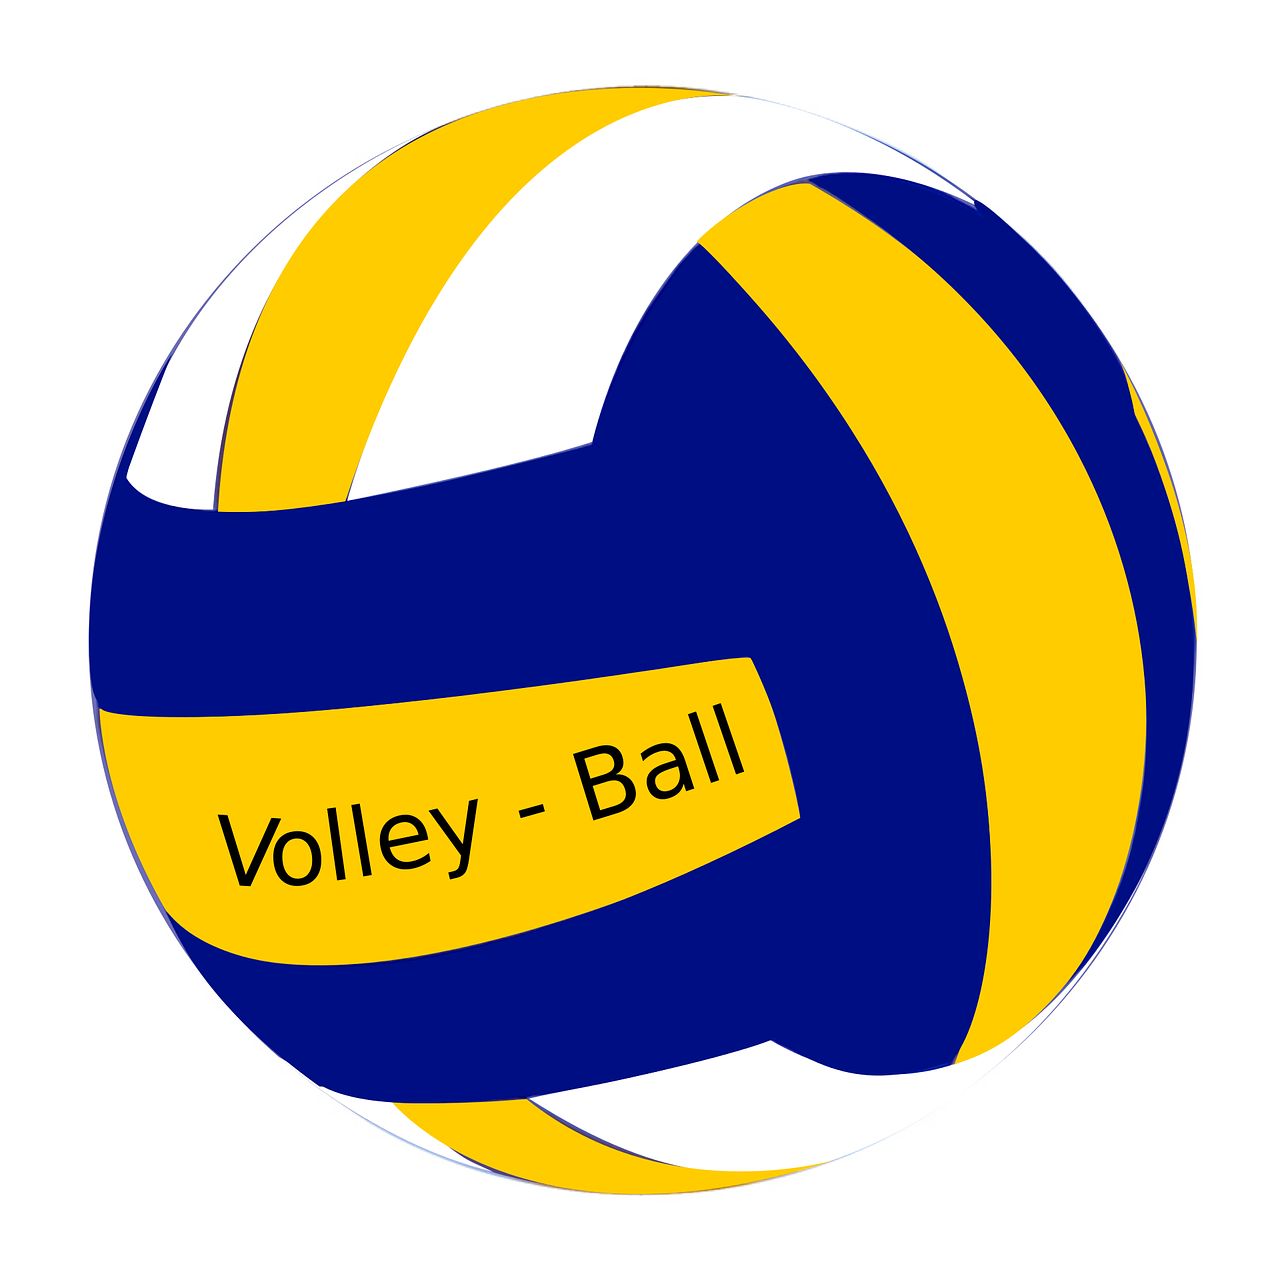 Ball Female Volley Volleyball  - OpenClipart-Vectors / Pixabay